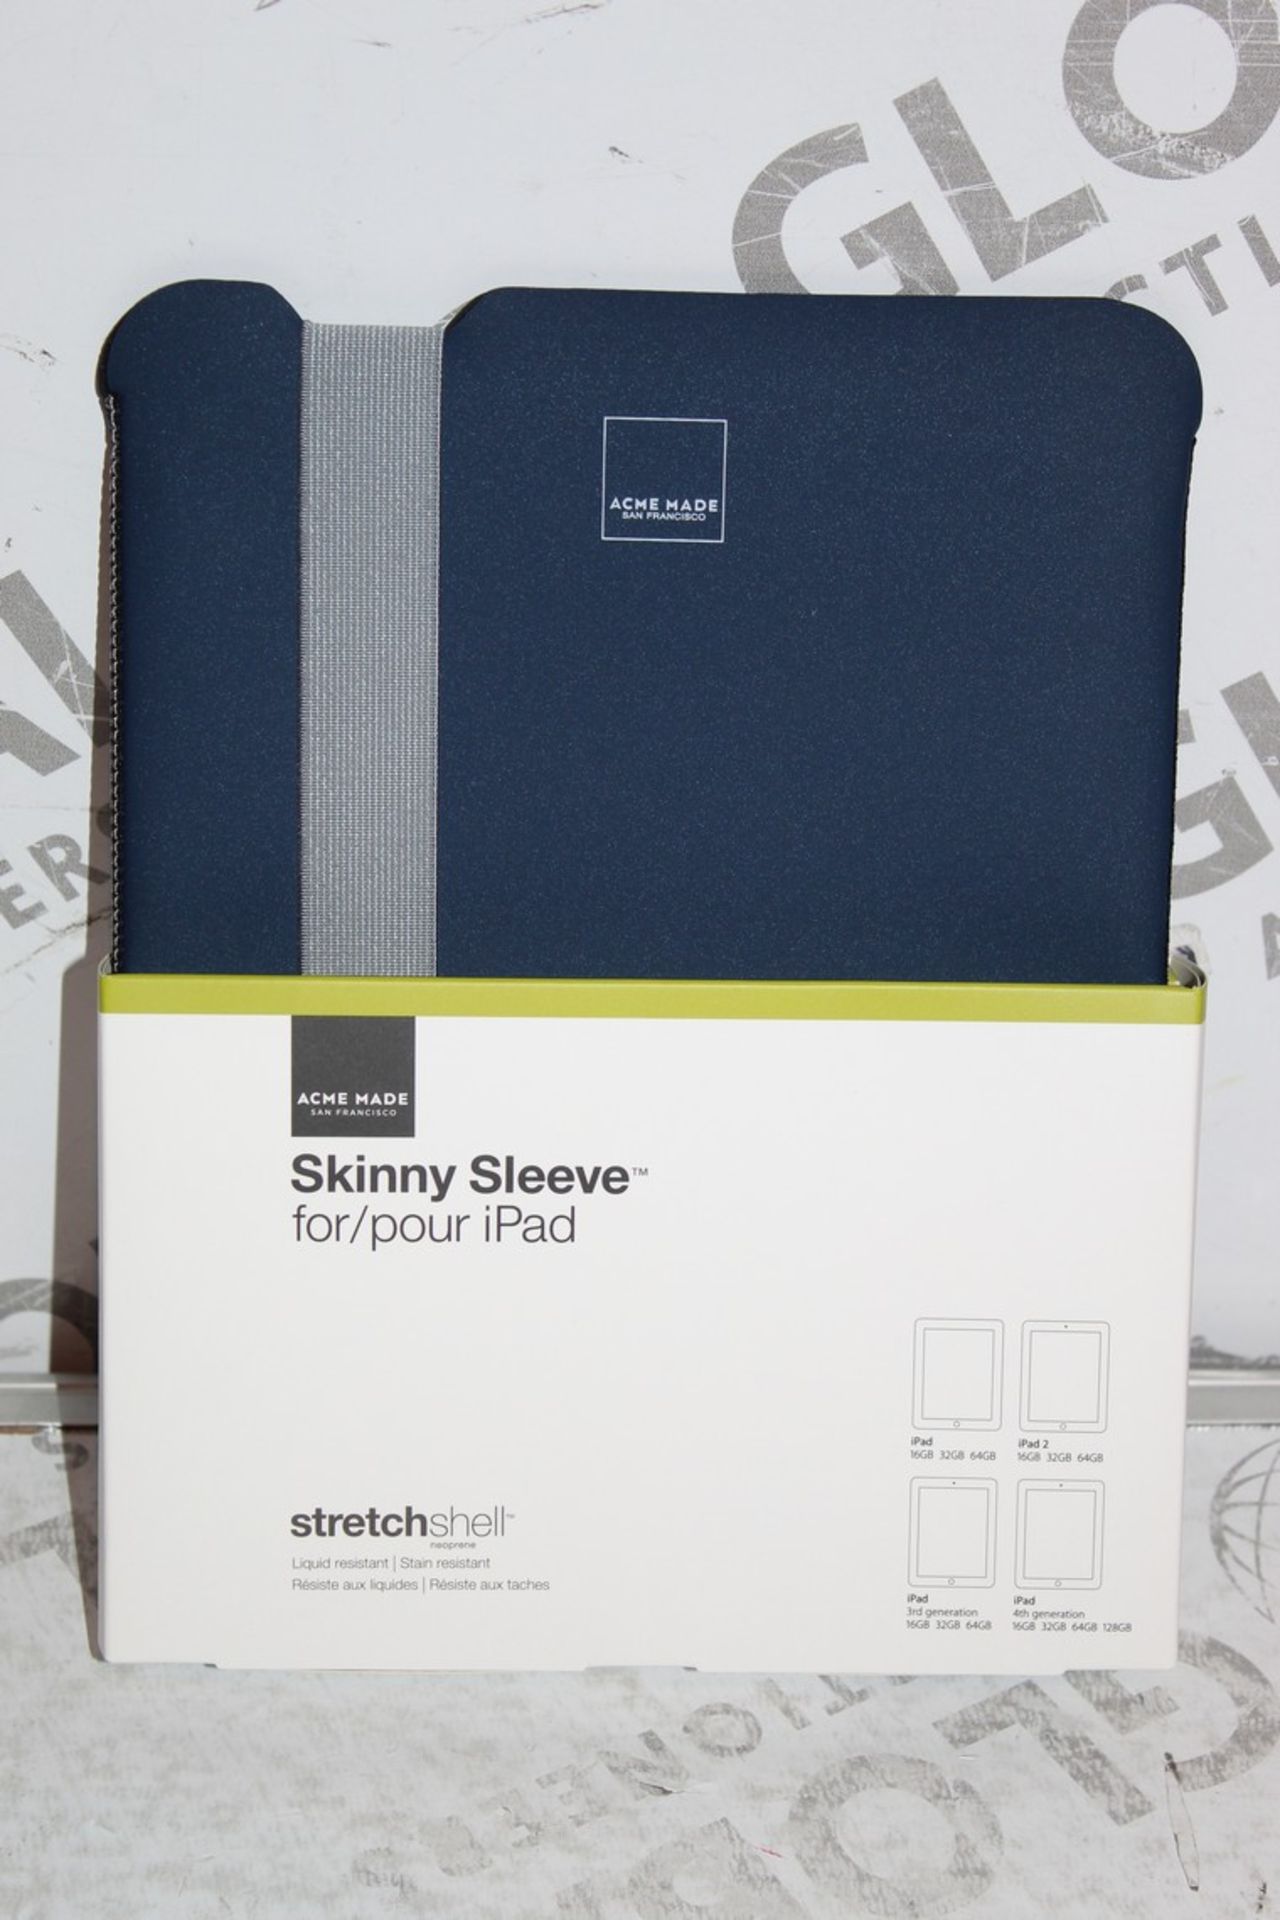 Lot to Contain 24 Brand New Acme Made Skinny Sleeve Ipad Cases Combined RRP £480